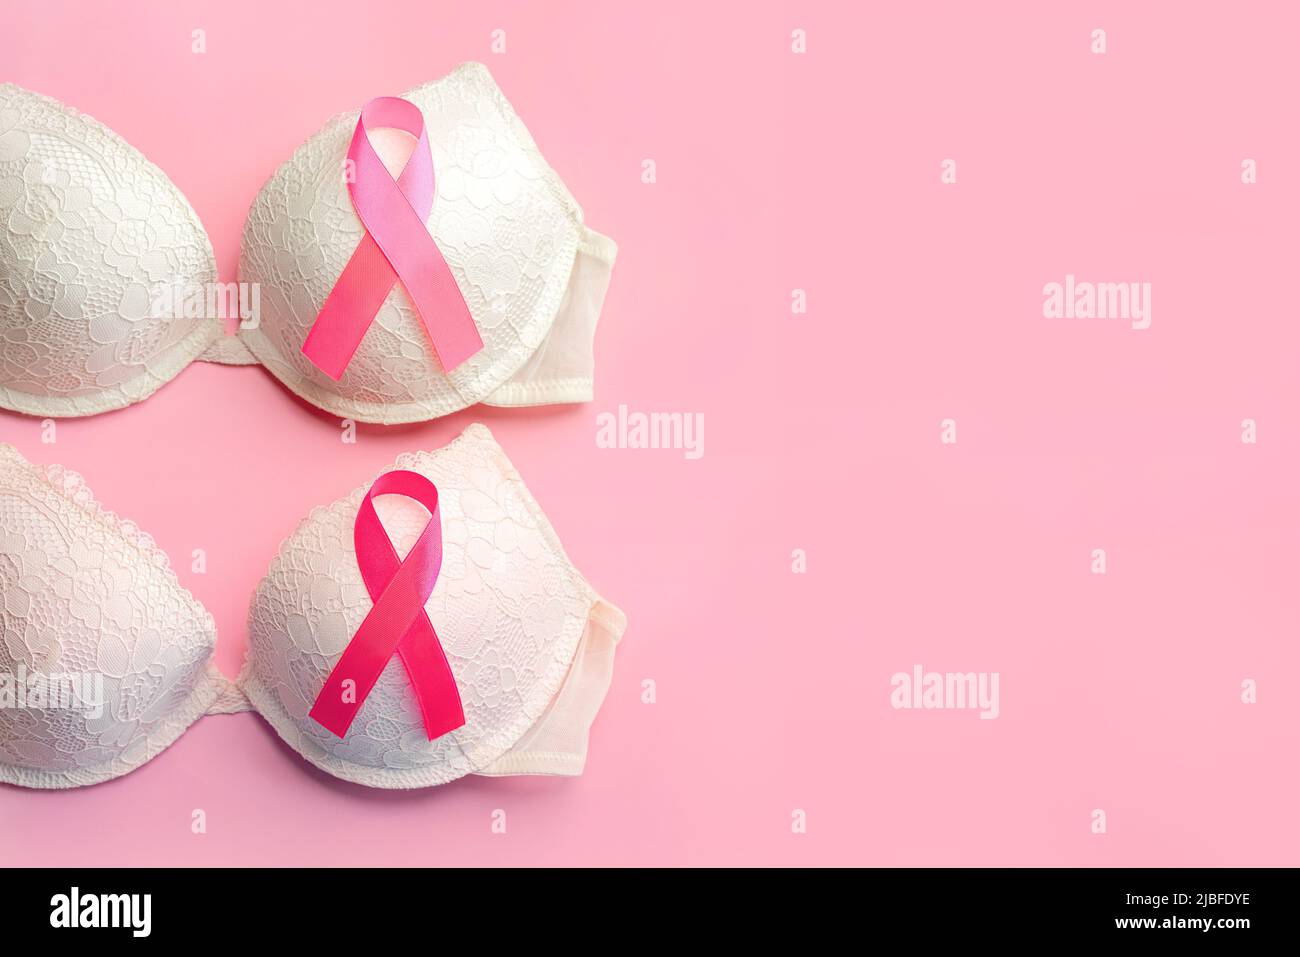 Breast cancer concept. Top view of women's bras and pink ribbon symbol breast cancer awareness over pink background Stock Photo